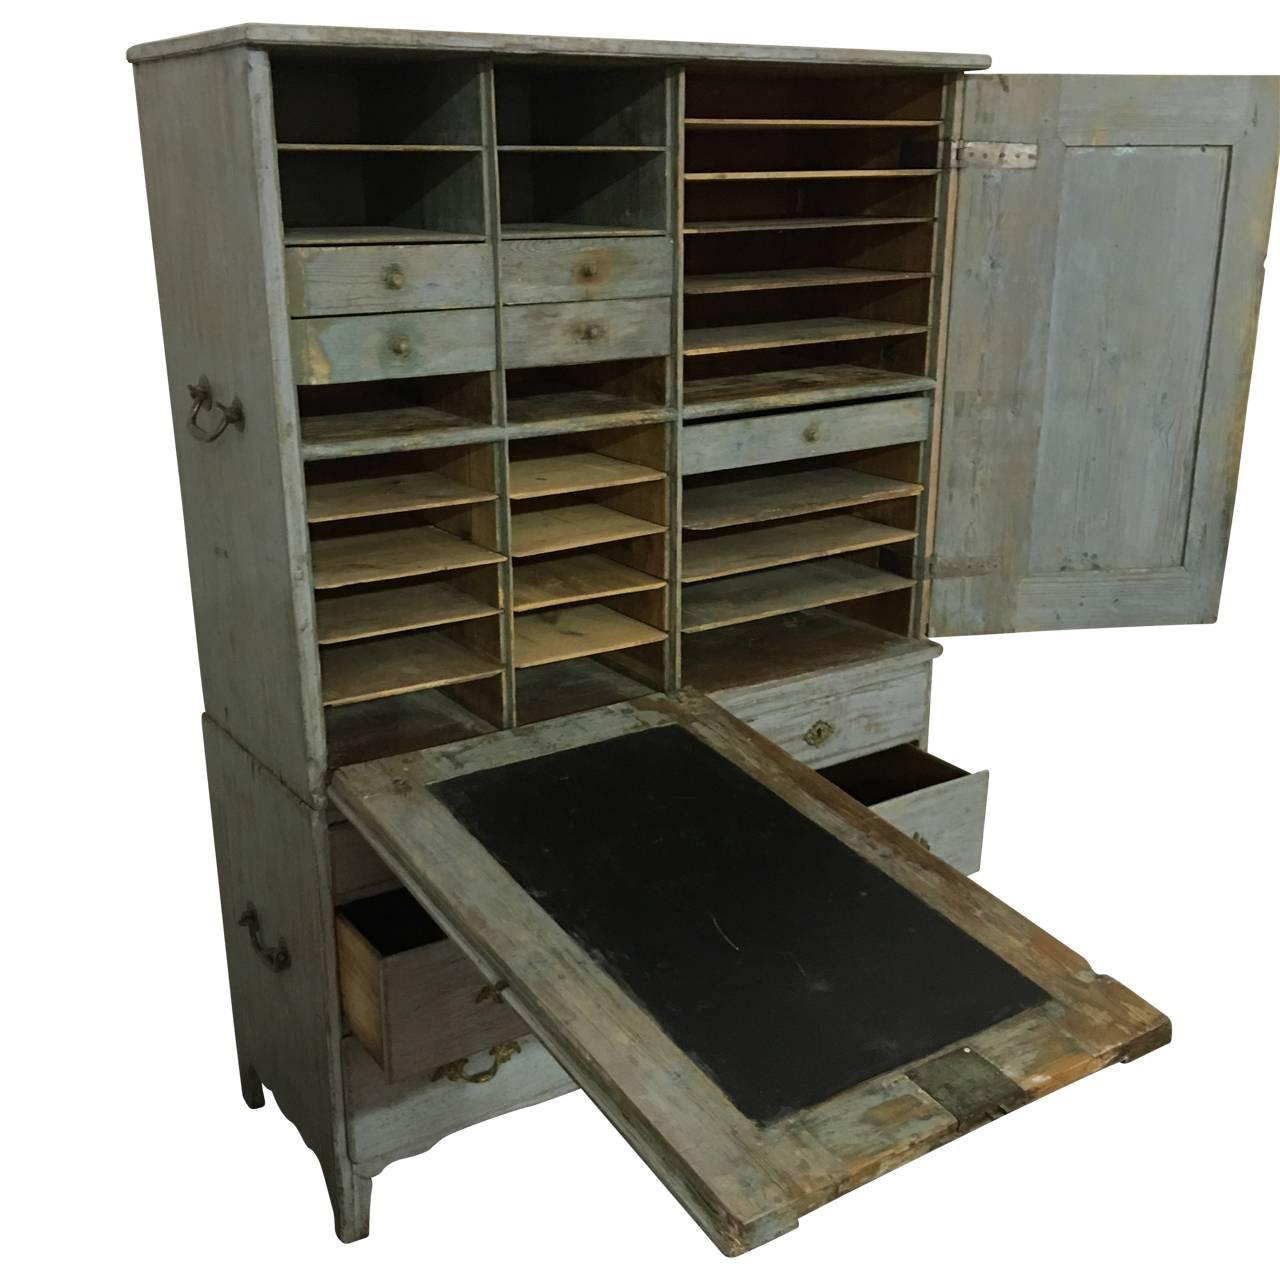 One of a kind writing desk with drop-down writing desk and multiple cubbyholes for papers etc. 

$150 flat rate front door delivery includes Washington DC metro, Baltimore and Philadelphia